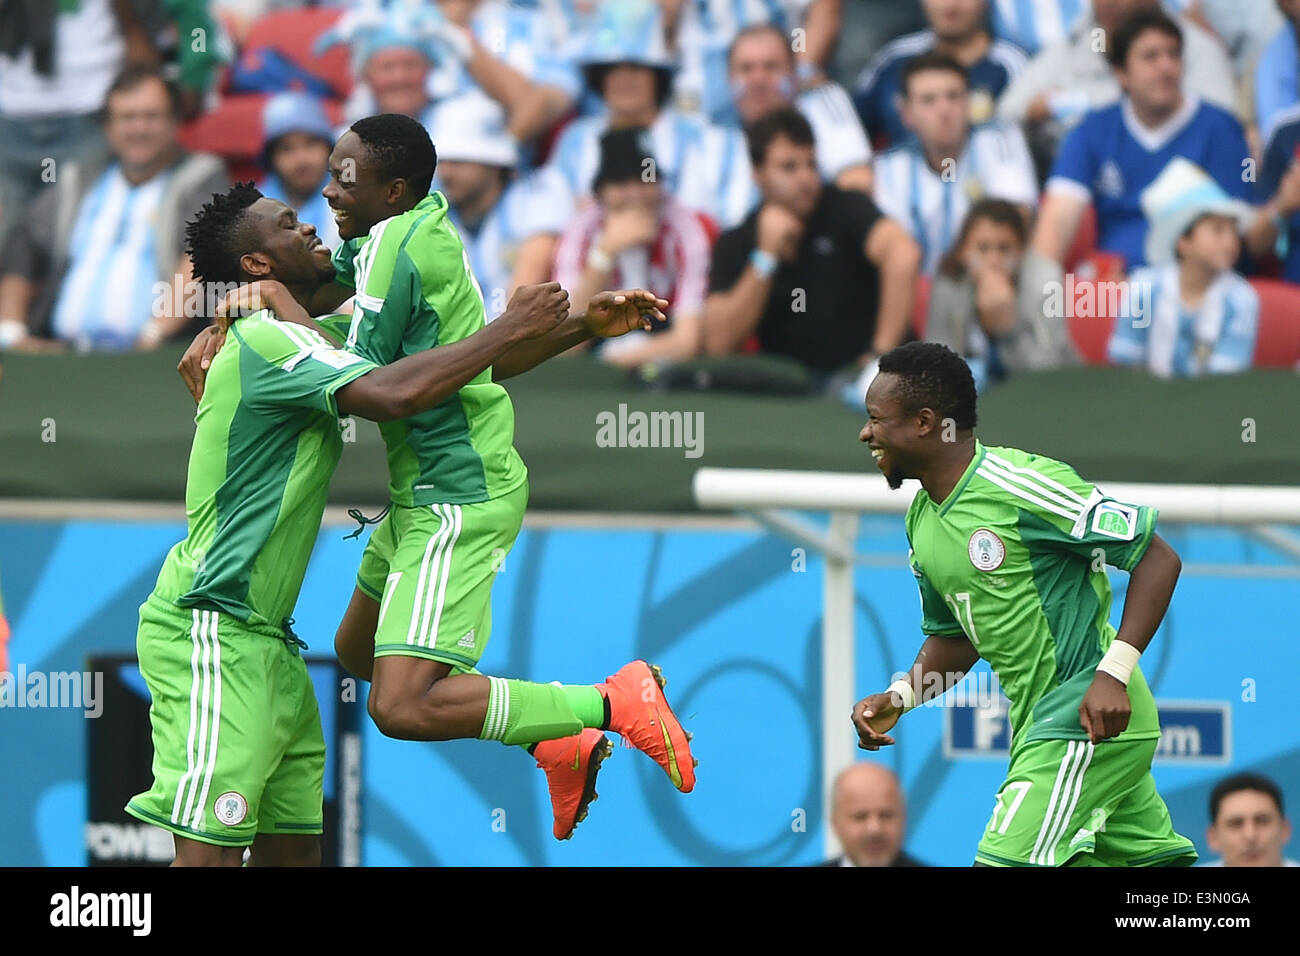 Porto Alegre, Brazil. 25th June, 2014. PORTO ALEGRE BRAZIL -15 Jun: Ahmed Musa celebration in the match between Argentina and Nigeria, corresponding to the group F of the World Cup 2014, played at the Beira Rio stadium, on June 25, 2014. Photo: Edu Andrade/Urbanandsport/Nurphoto Credit:  Edu Andrade/NurPhoto/ZUMAPRESS.com/Alamy Live News Stock Photo